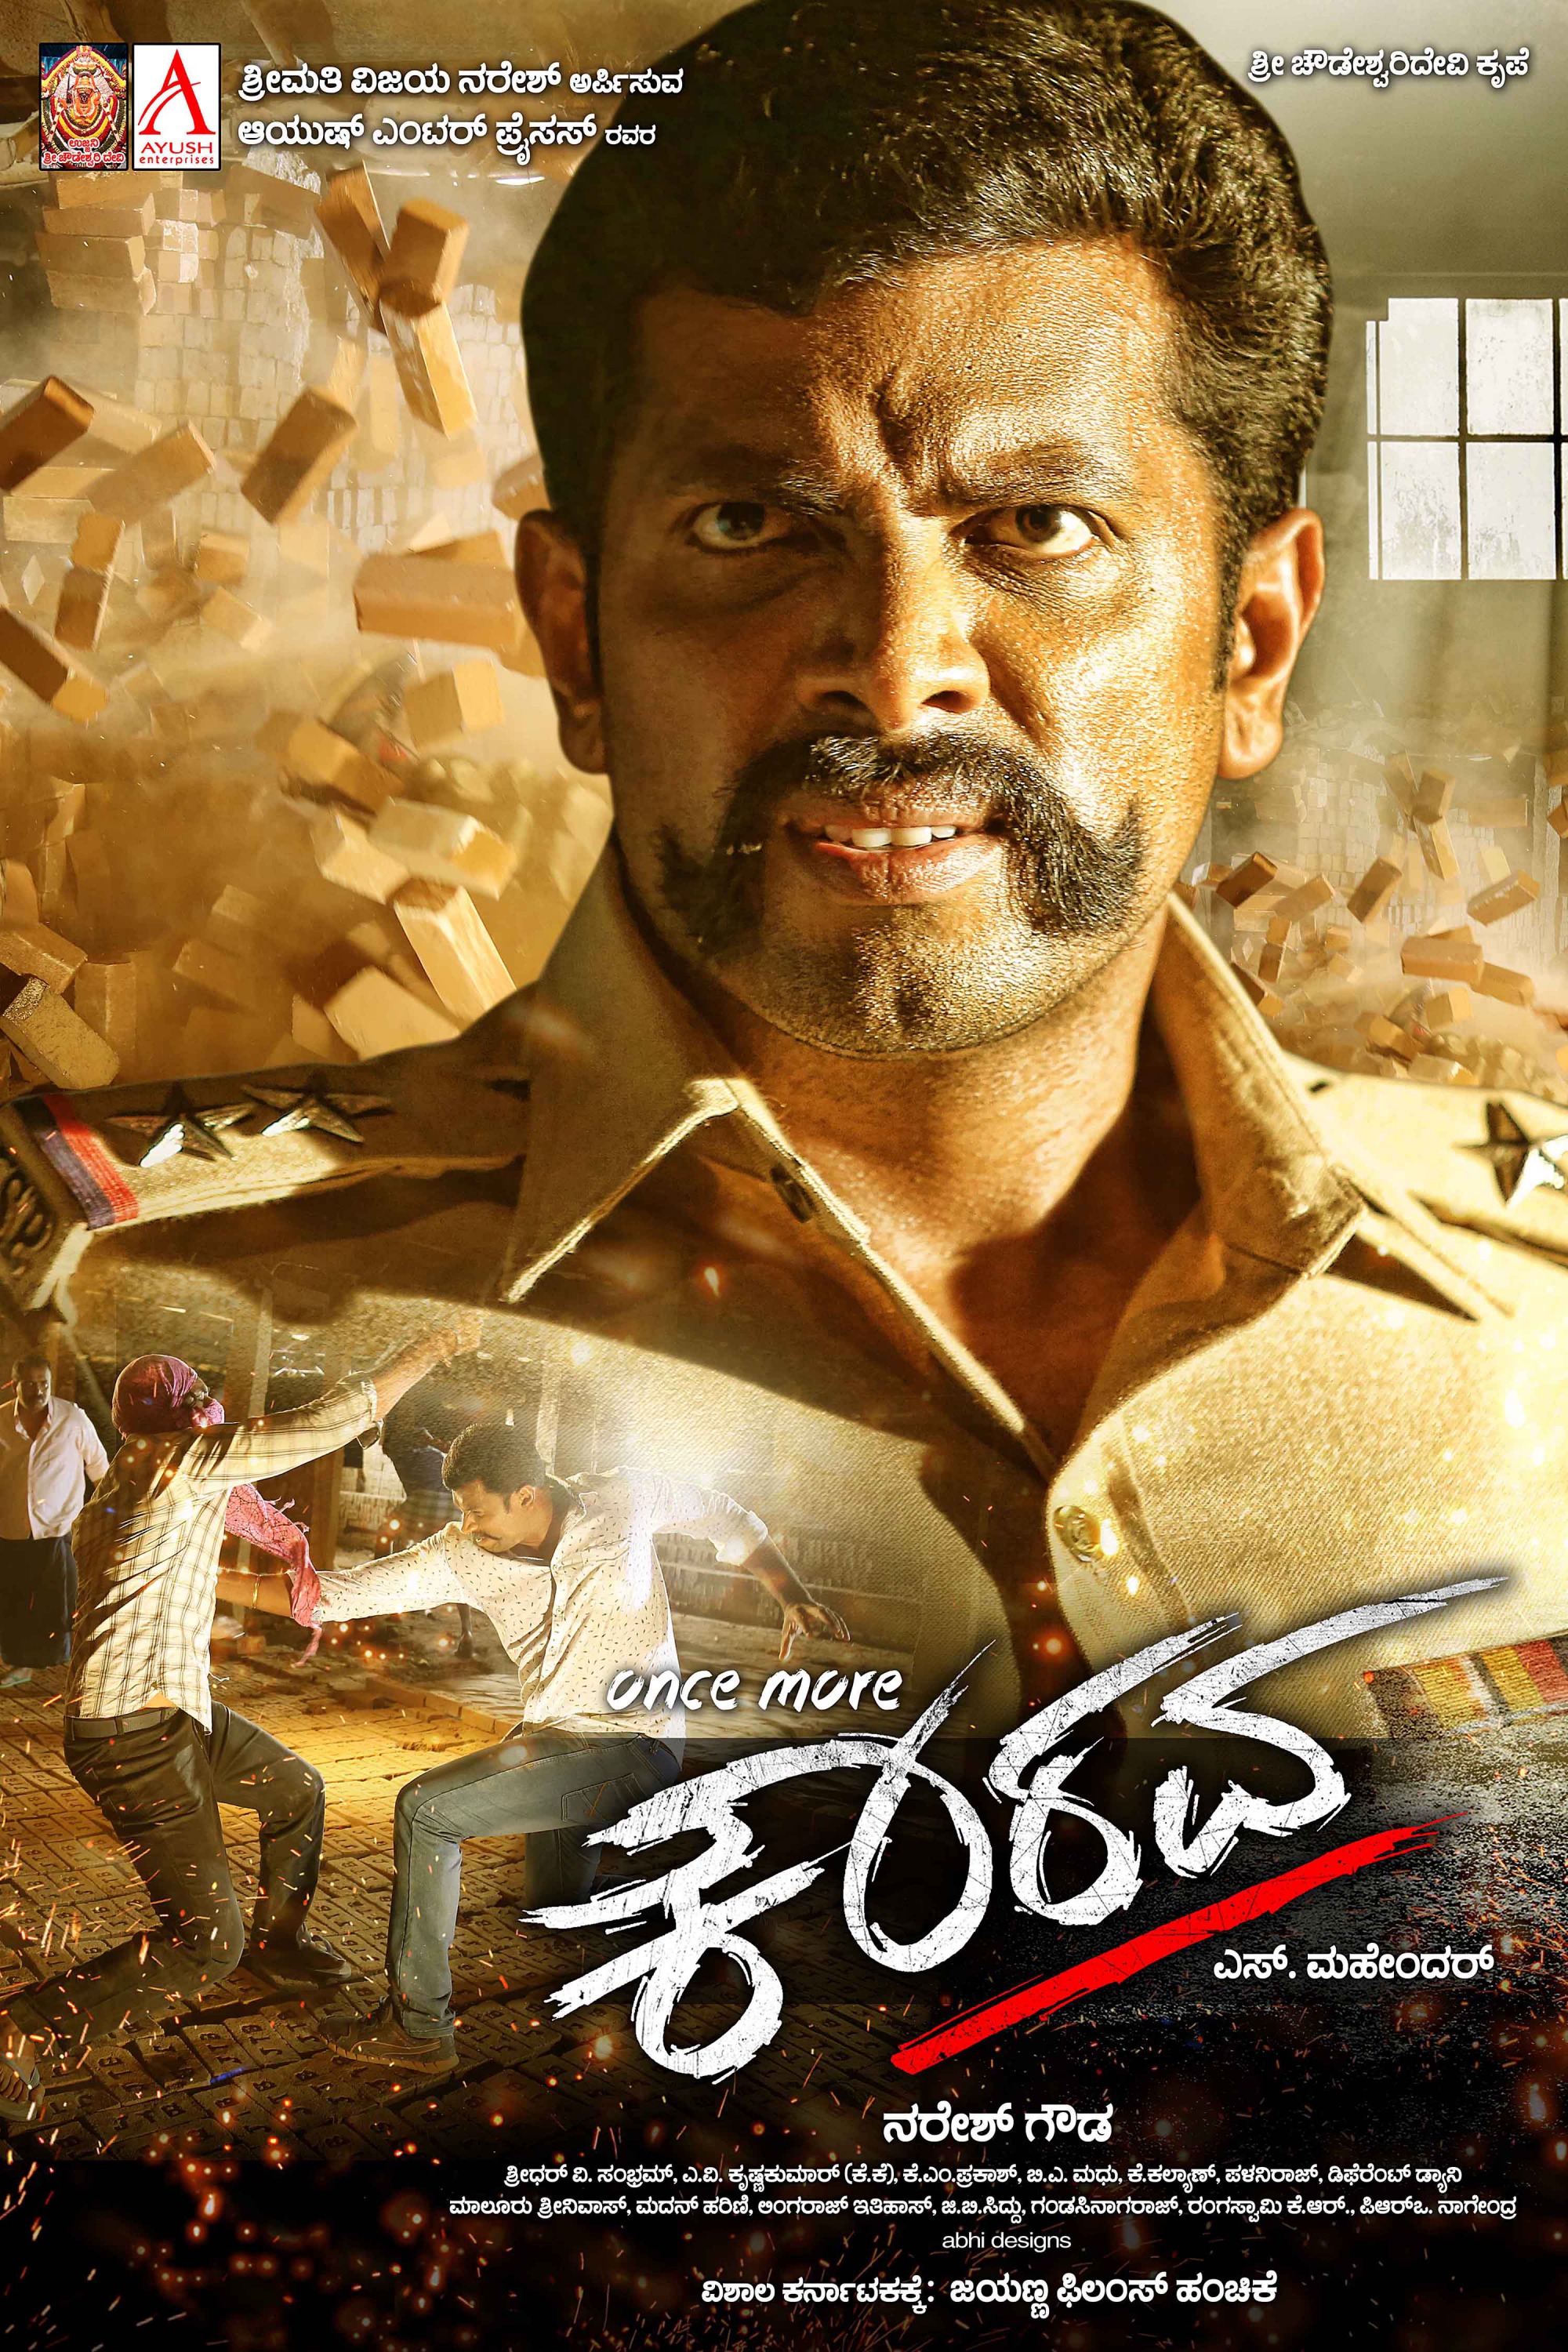 Mega Sized Movie Poster Image for Once More Kaurava (#9 of 20)